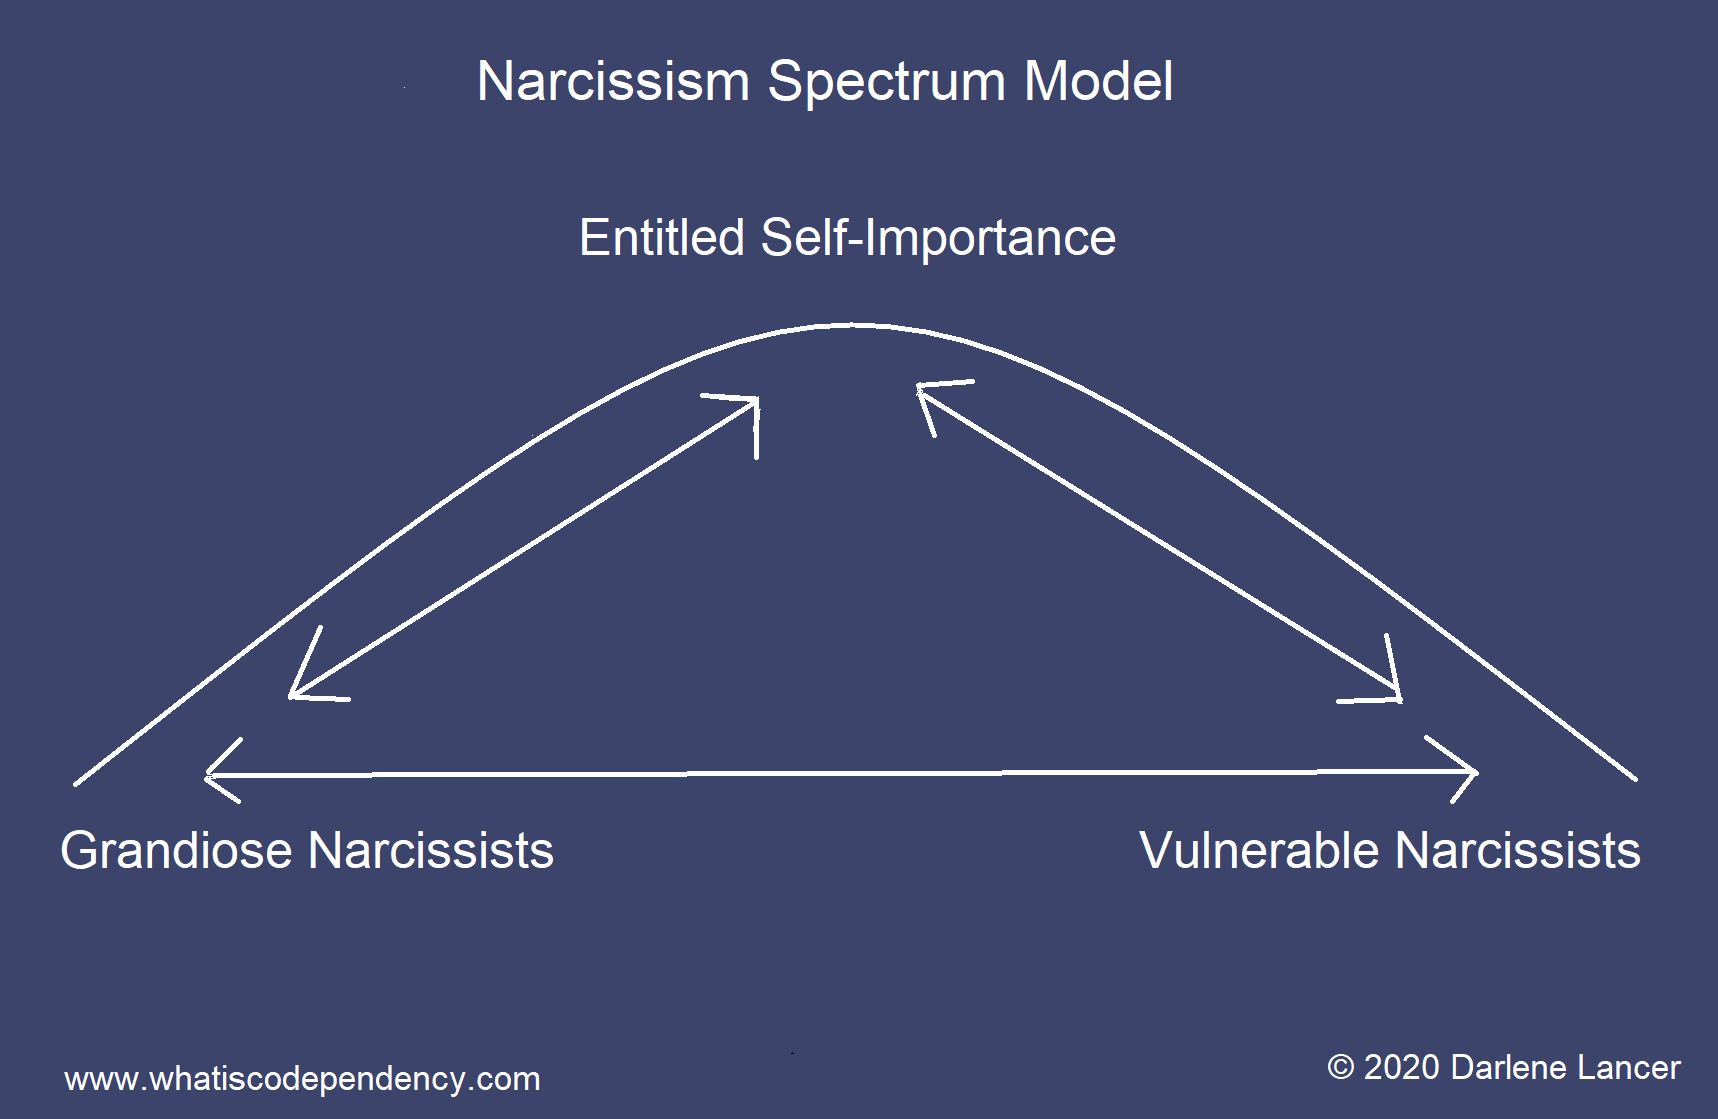 4 Types of Narcissism Share a Core Trait